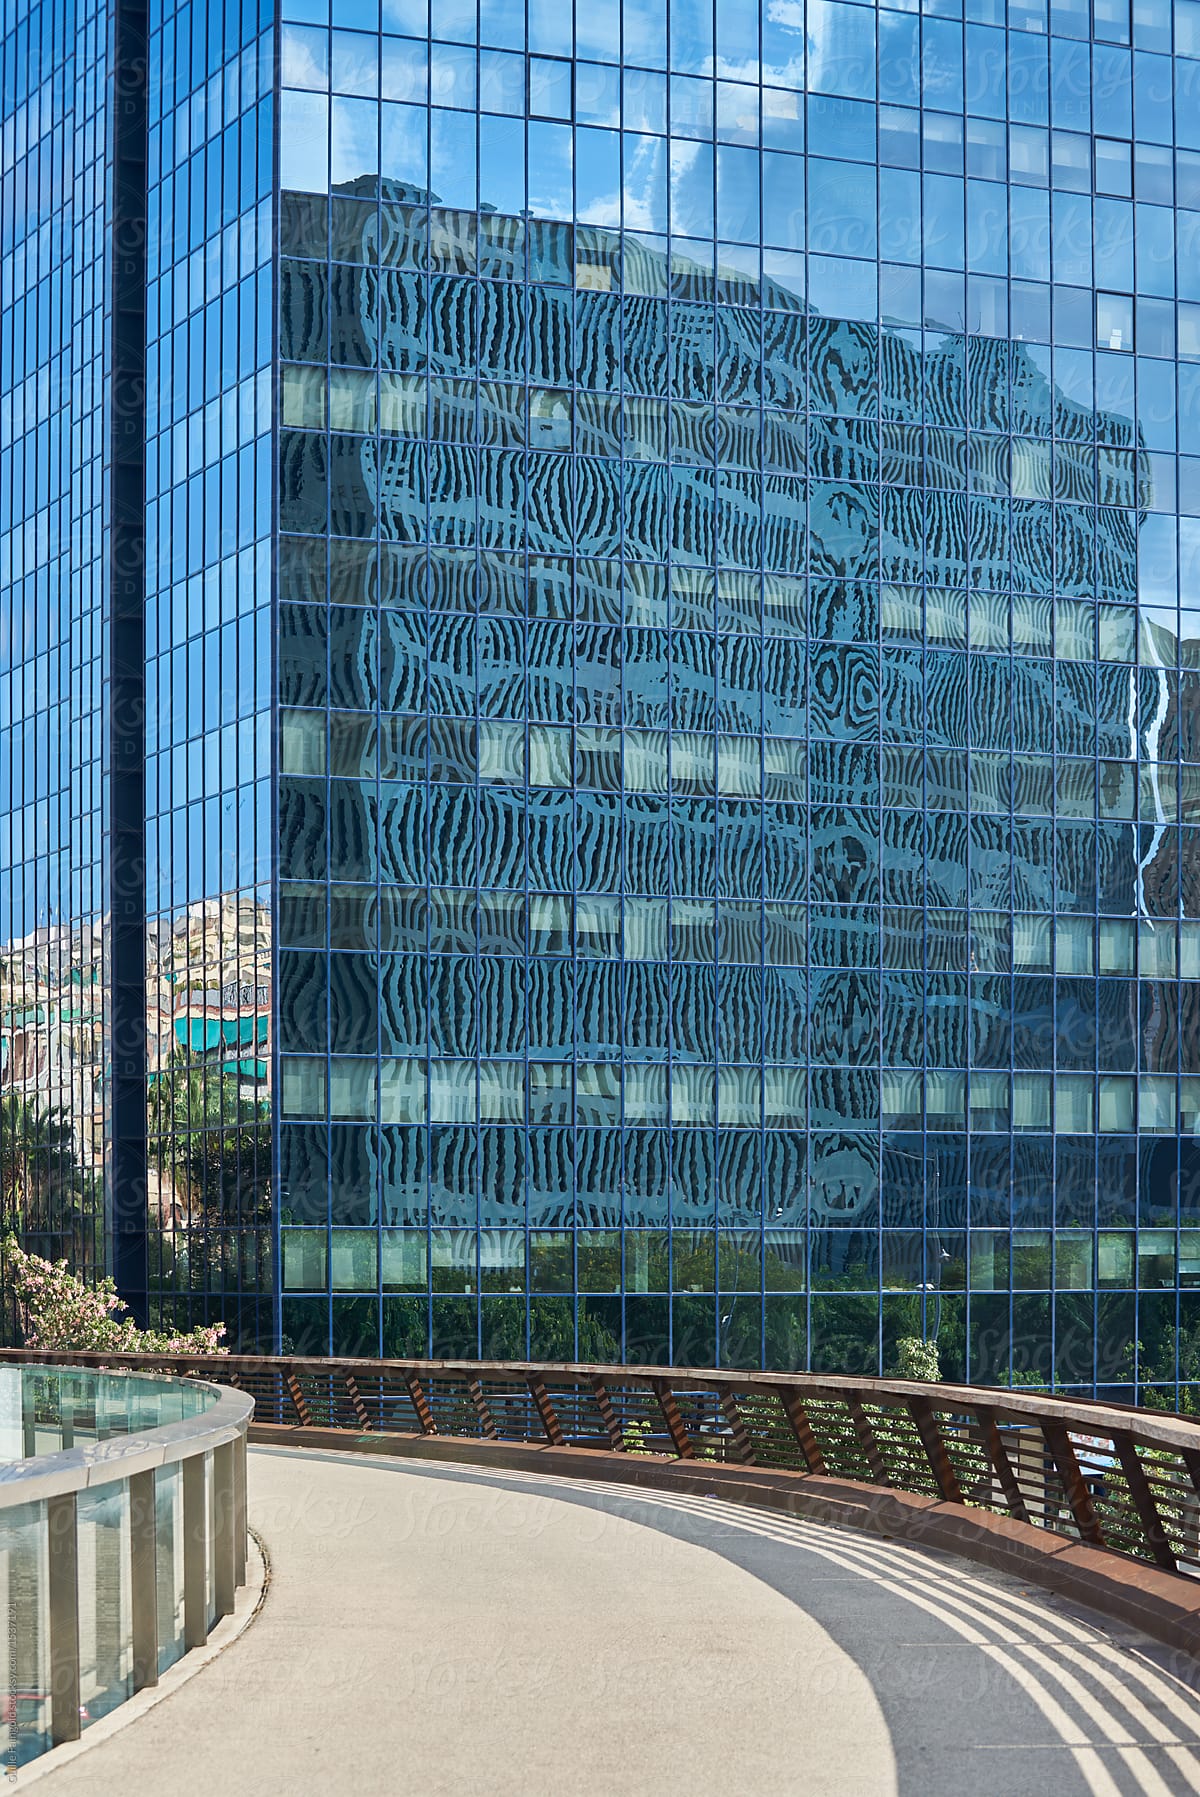 Reflection of modern building in glass building facade.